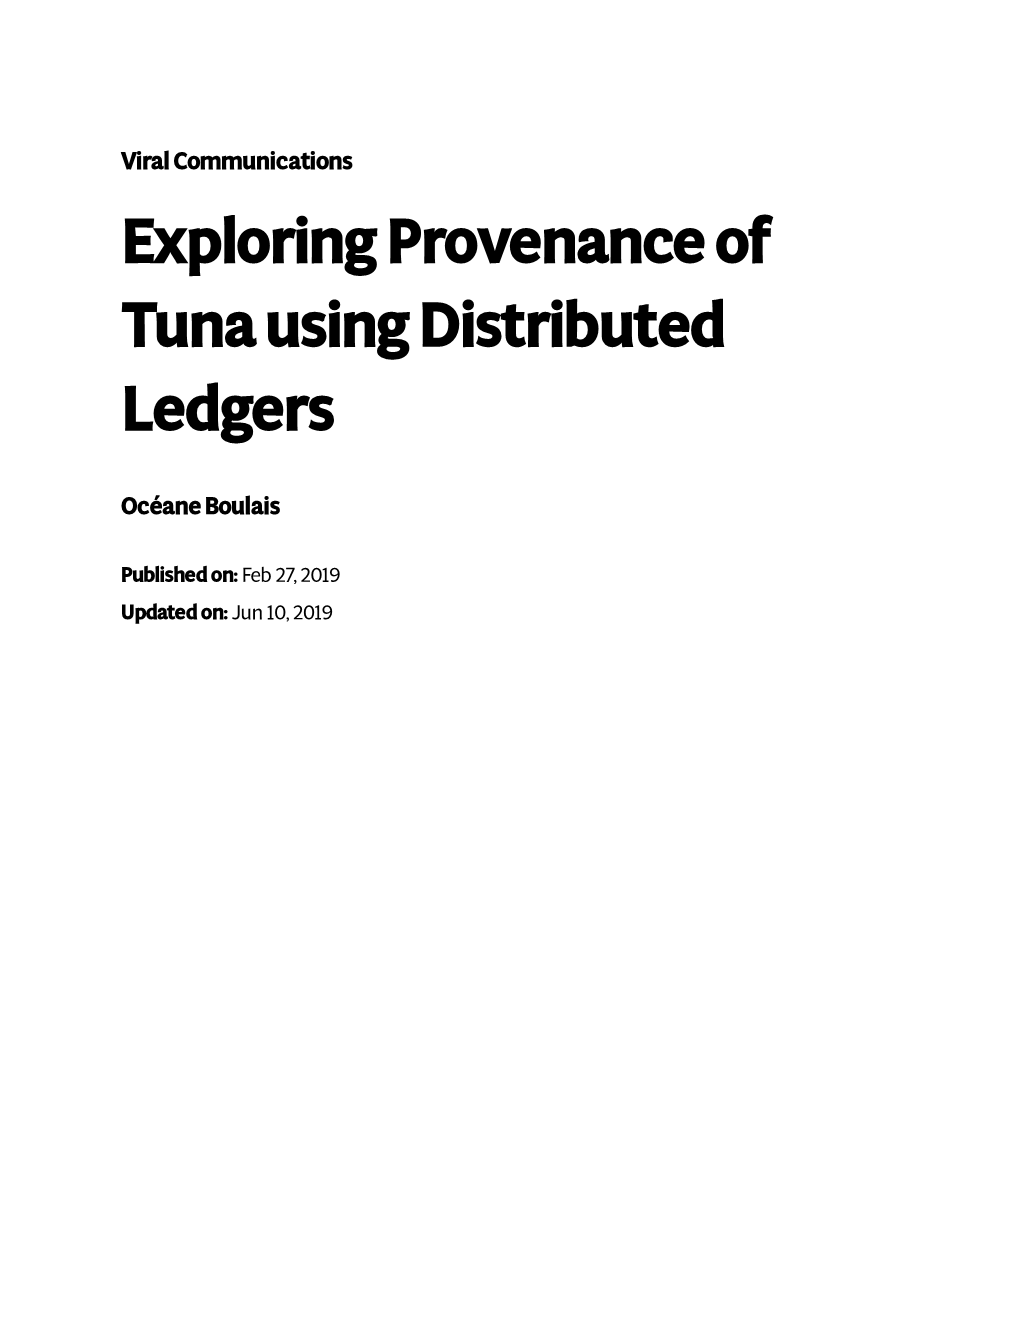 Exploring Provenance of Tuna Using Distributed Ledgers